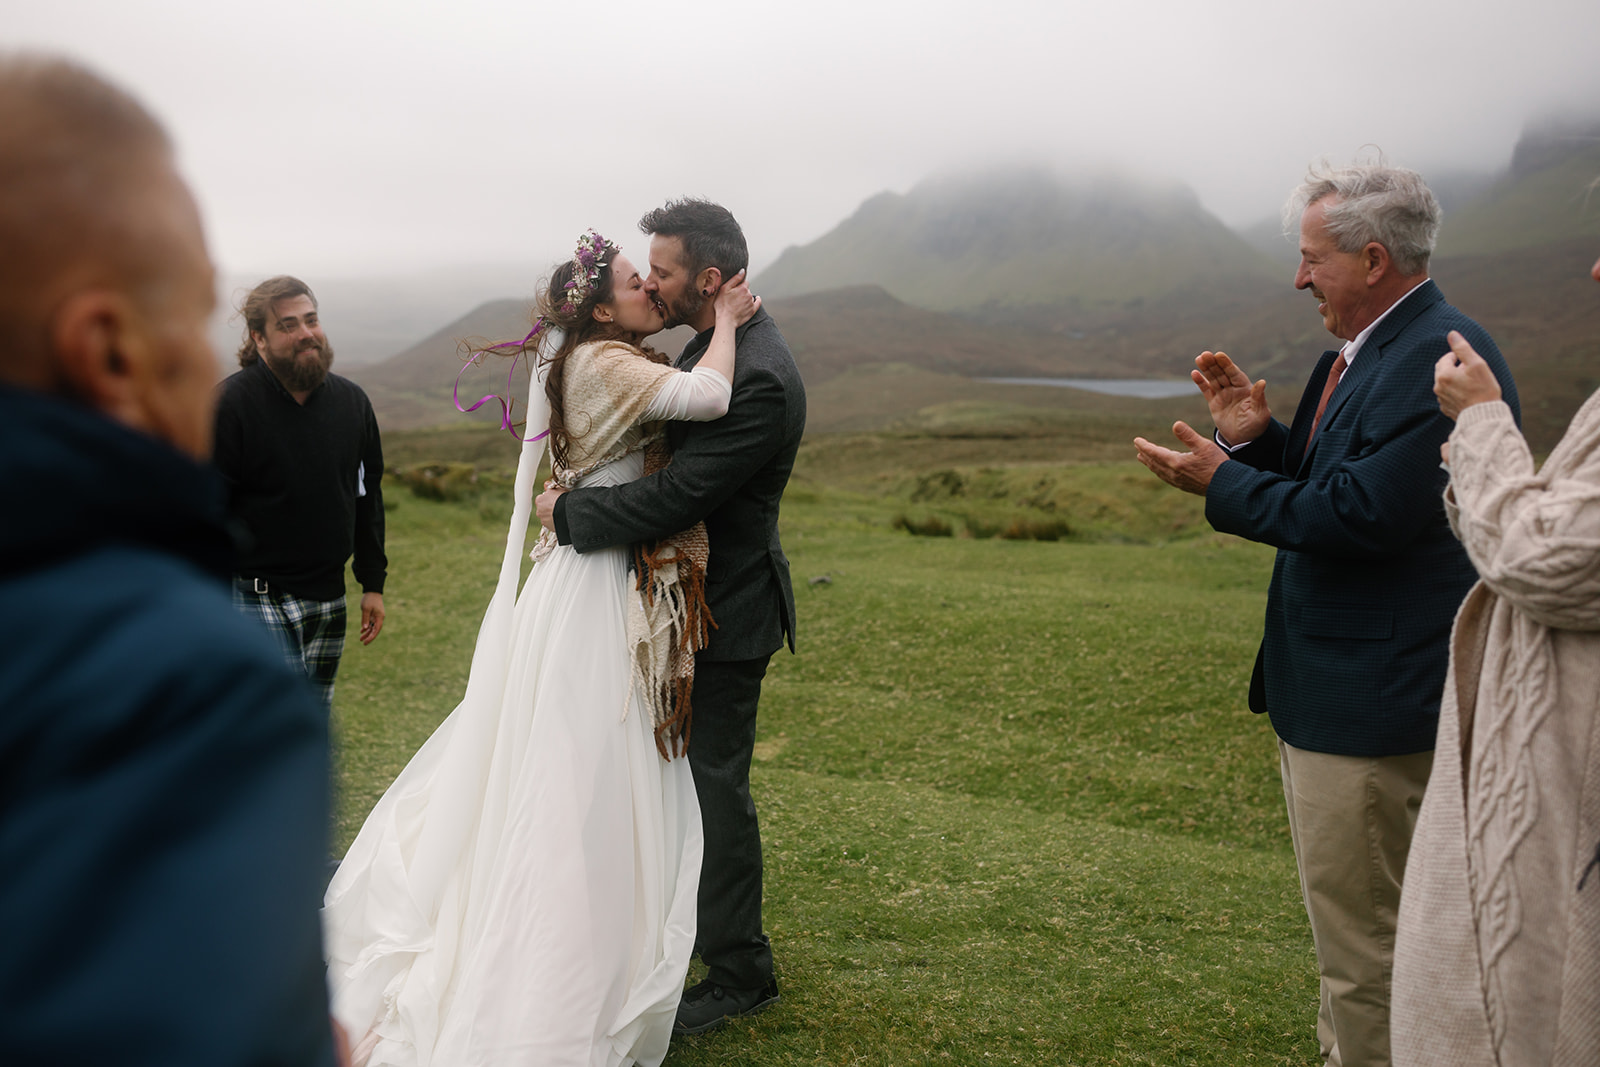 Becca and Nick exchange rings, sealing their commitment during their Isle of Skye elopement